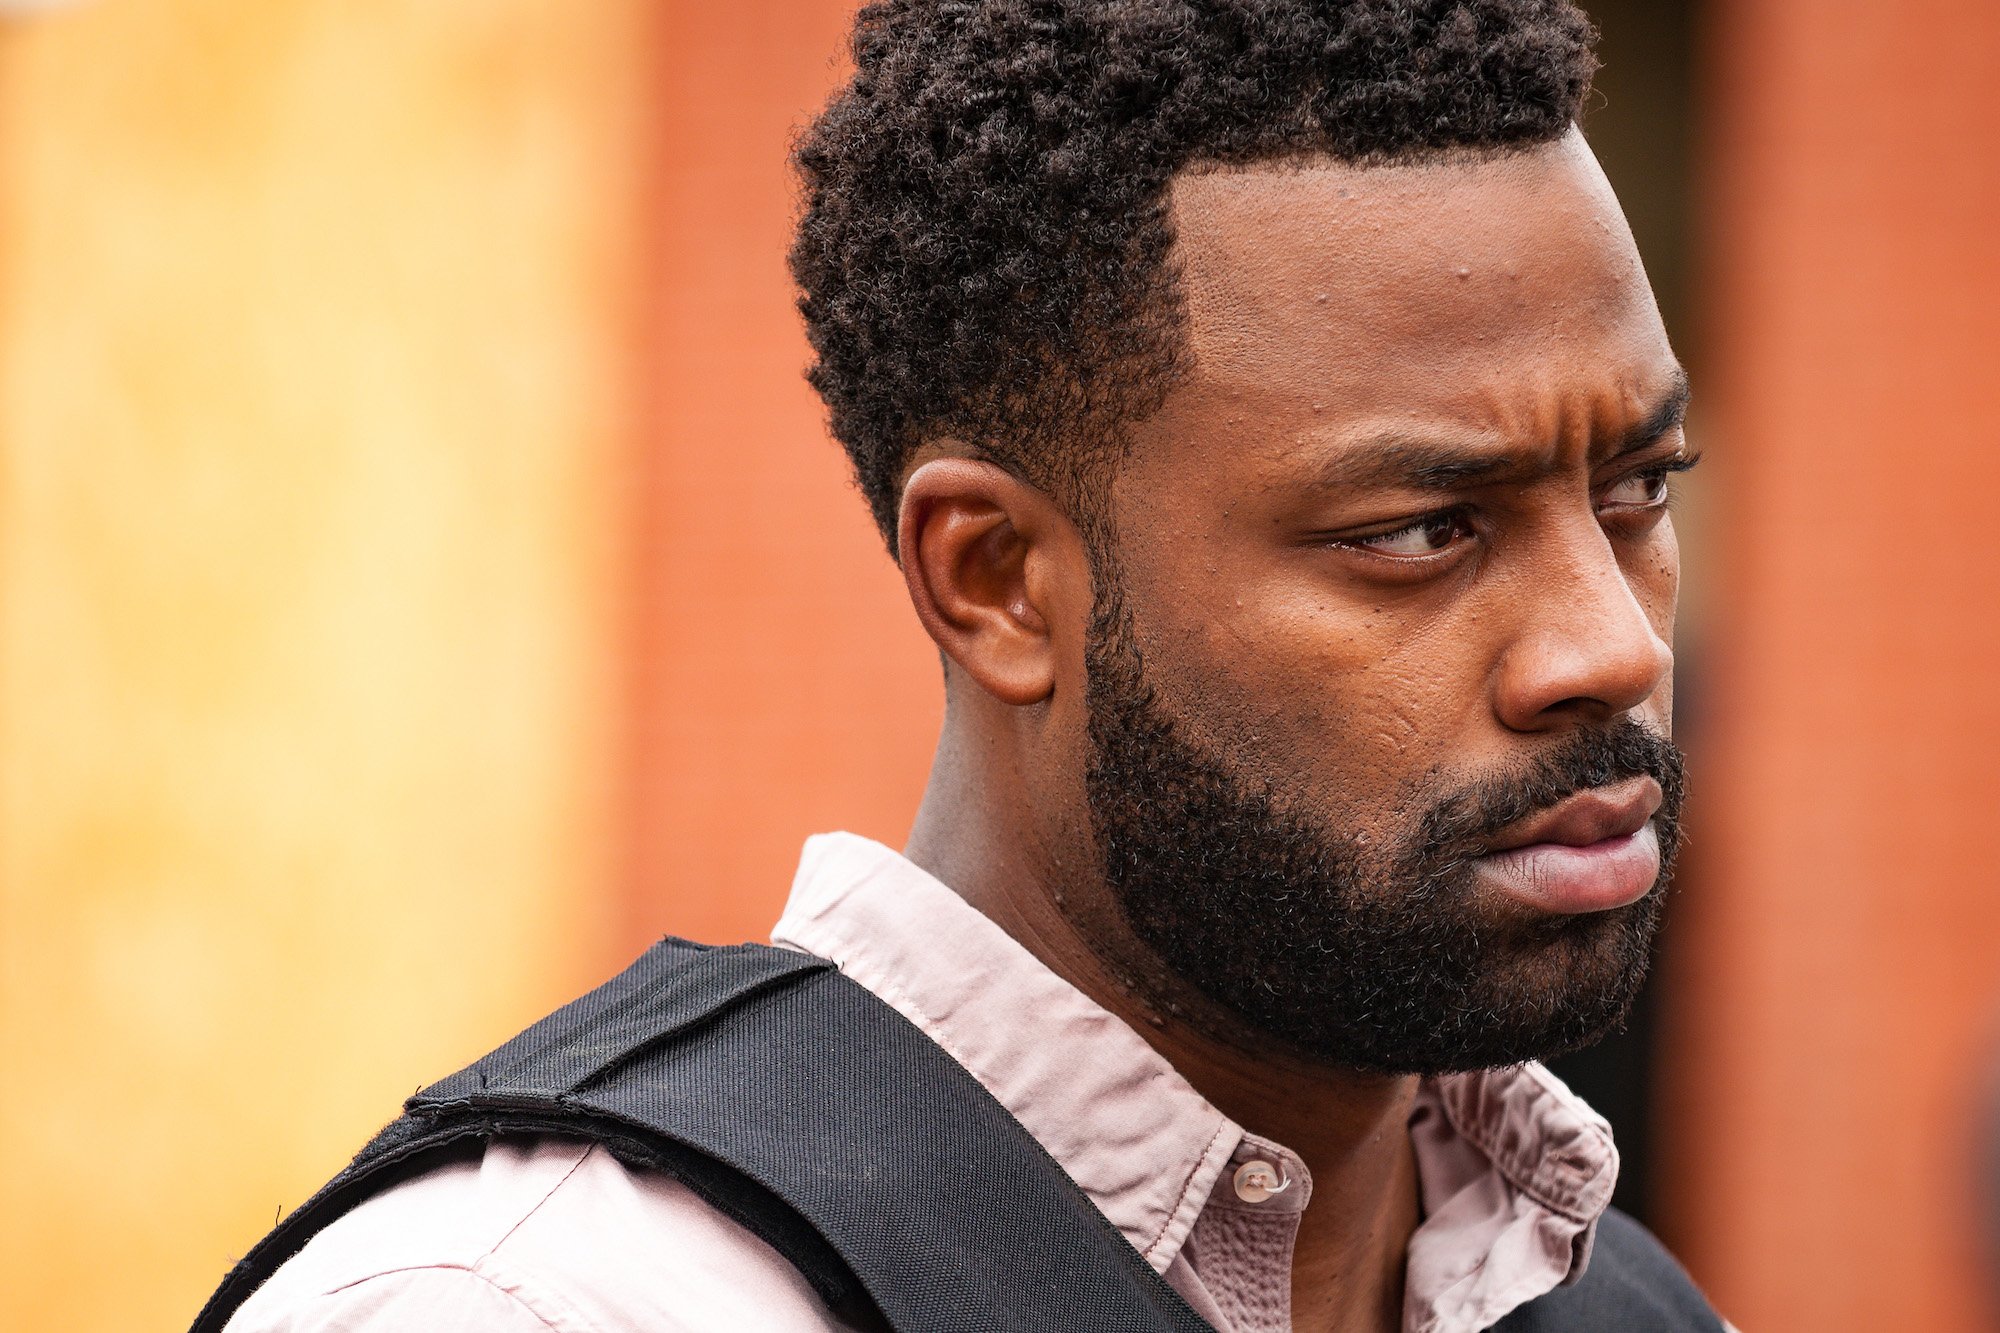 LaRoyce Hawkins as Officer Kevin Atwater looking away from the camera